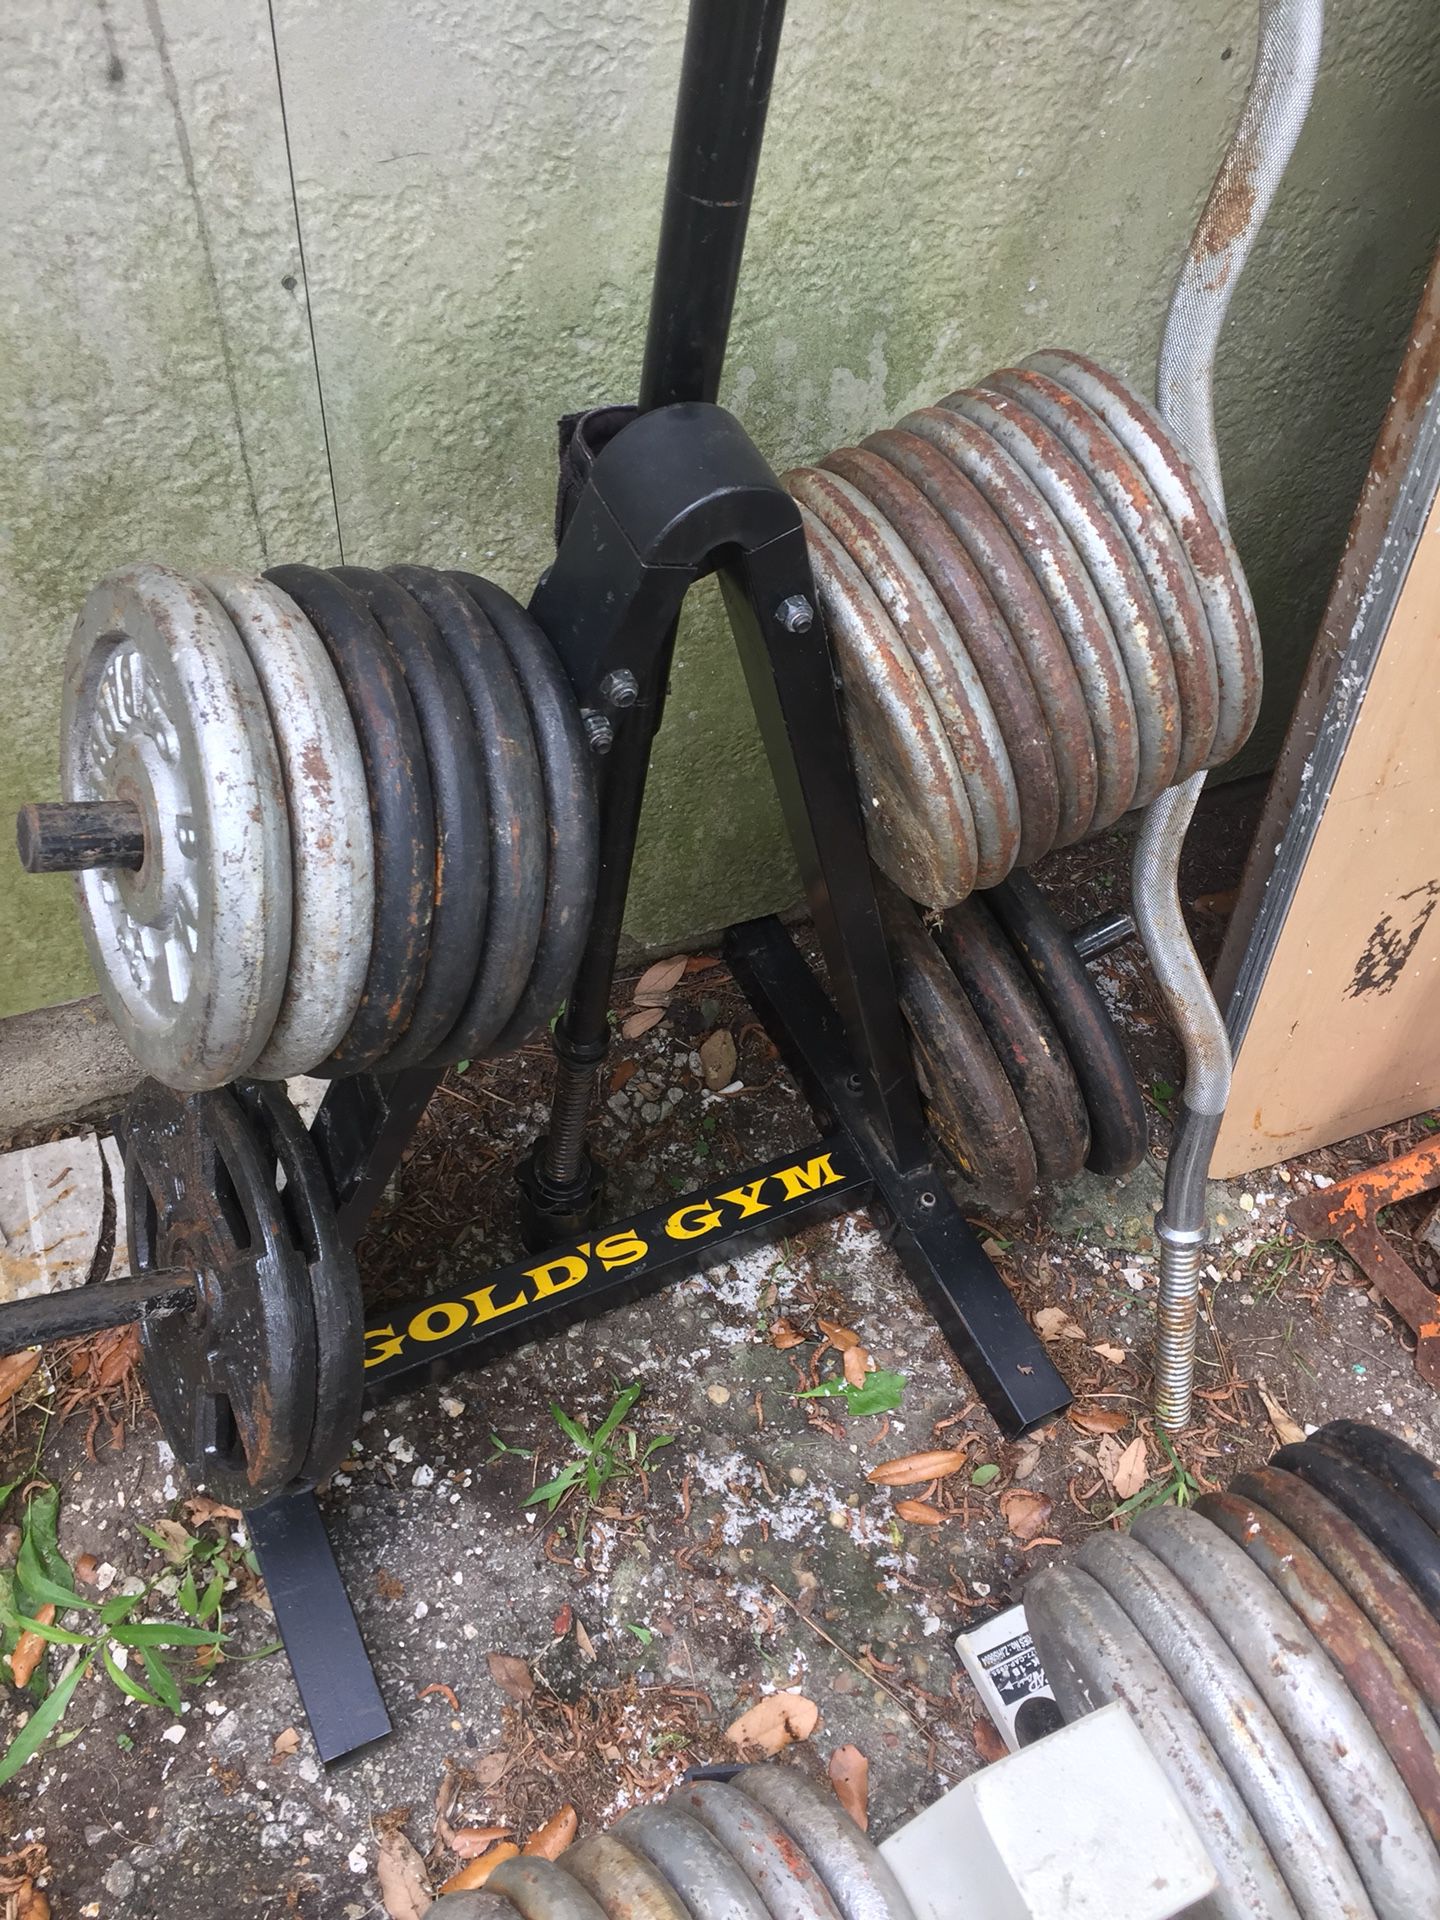 Weights, tree stands and bars